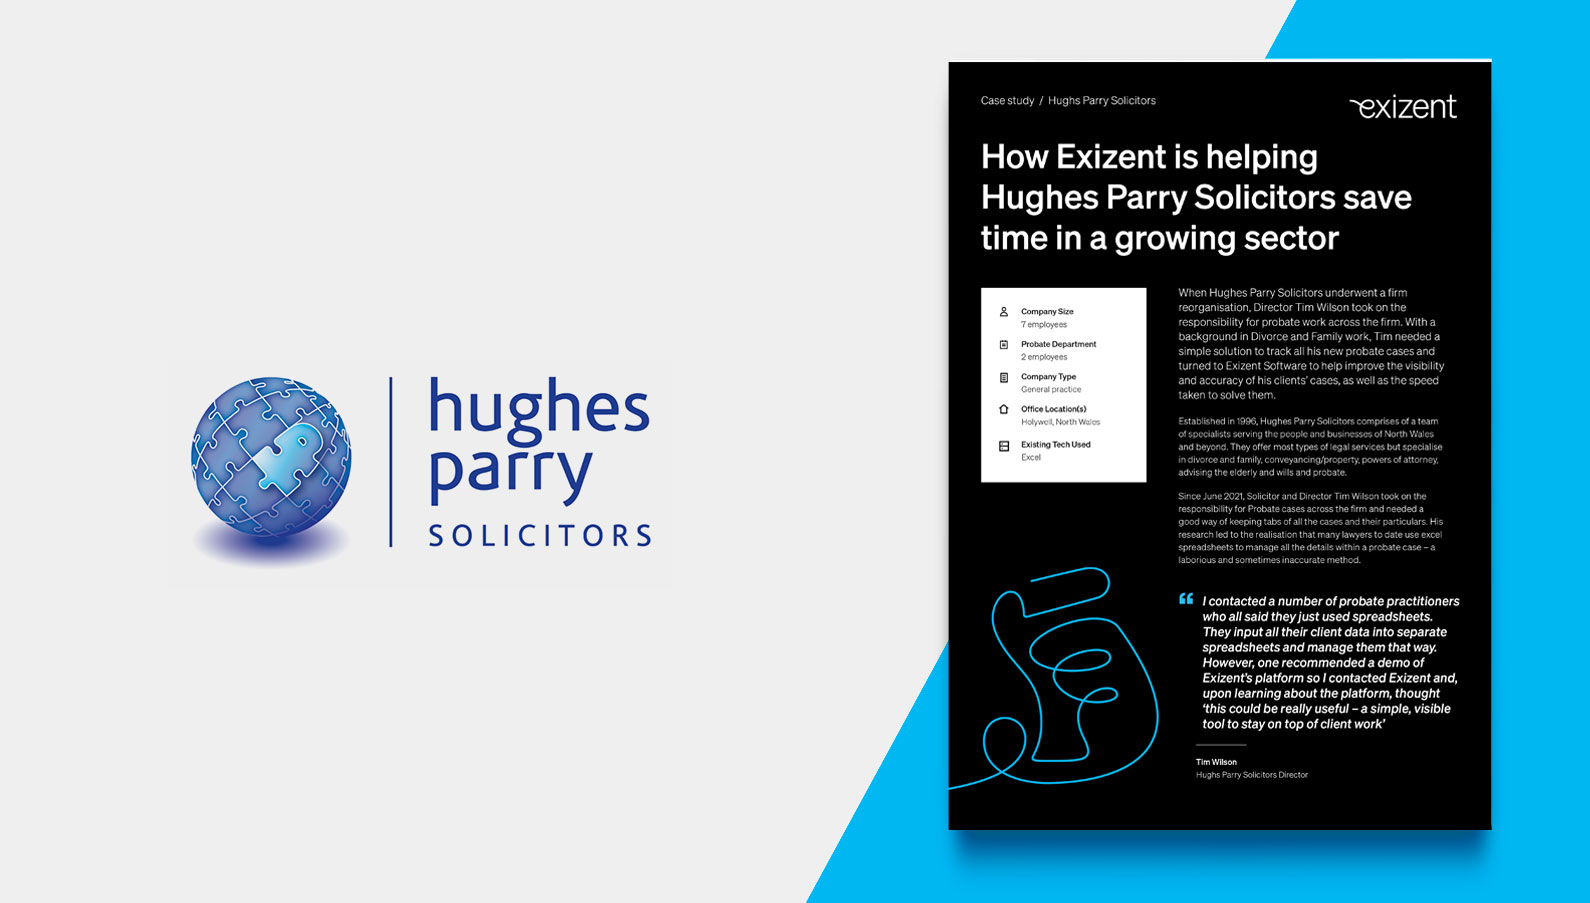 How Exizent is helping Hughes Parry Solicitors save time in a growing sector